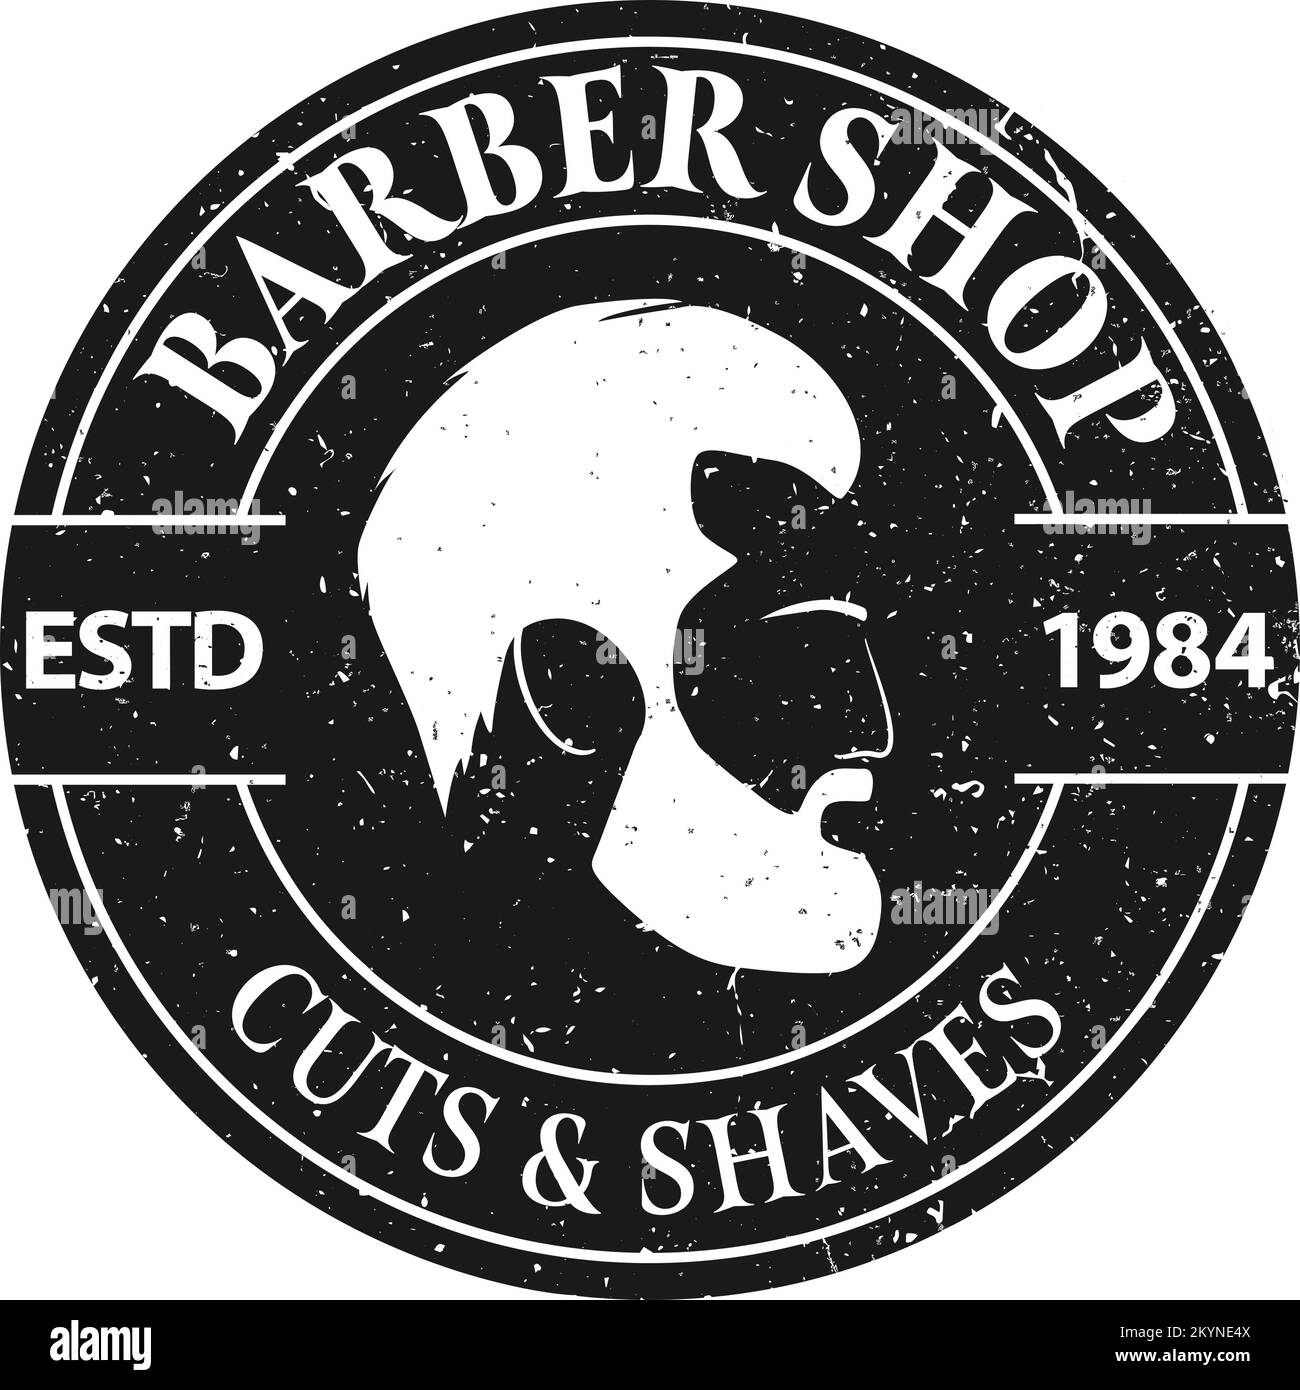 barber shop sign or logo with bearded hipster face silhouette, vector illustration Stock Vector